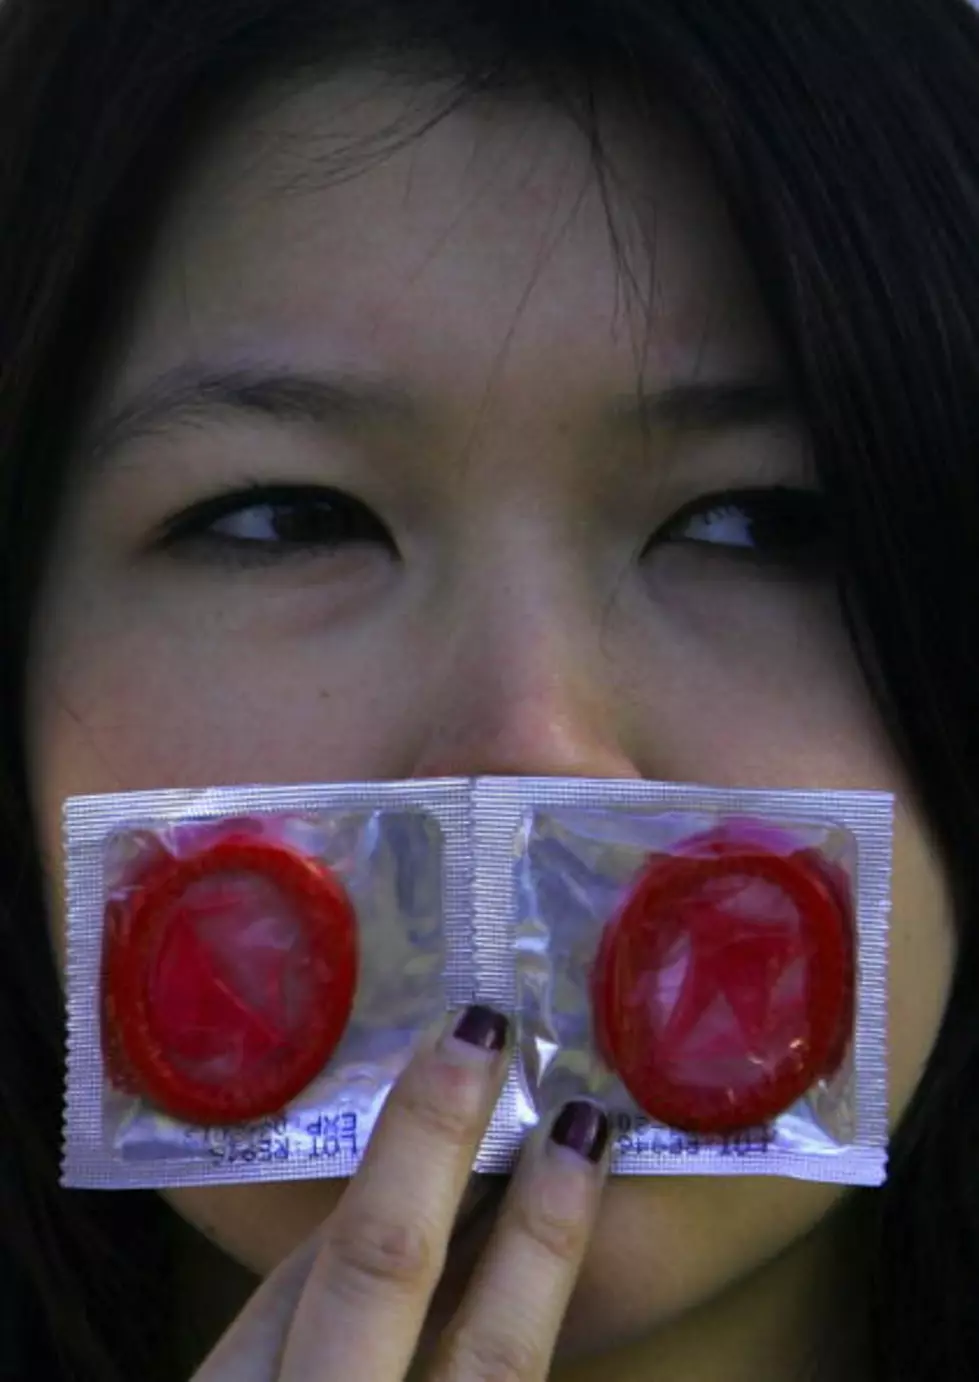 For $1700, You Could Rent this Dope-Ass Condom in Seattle